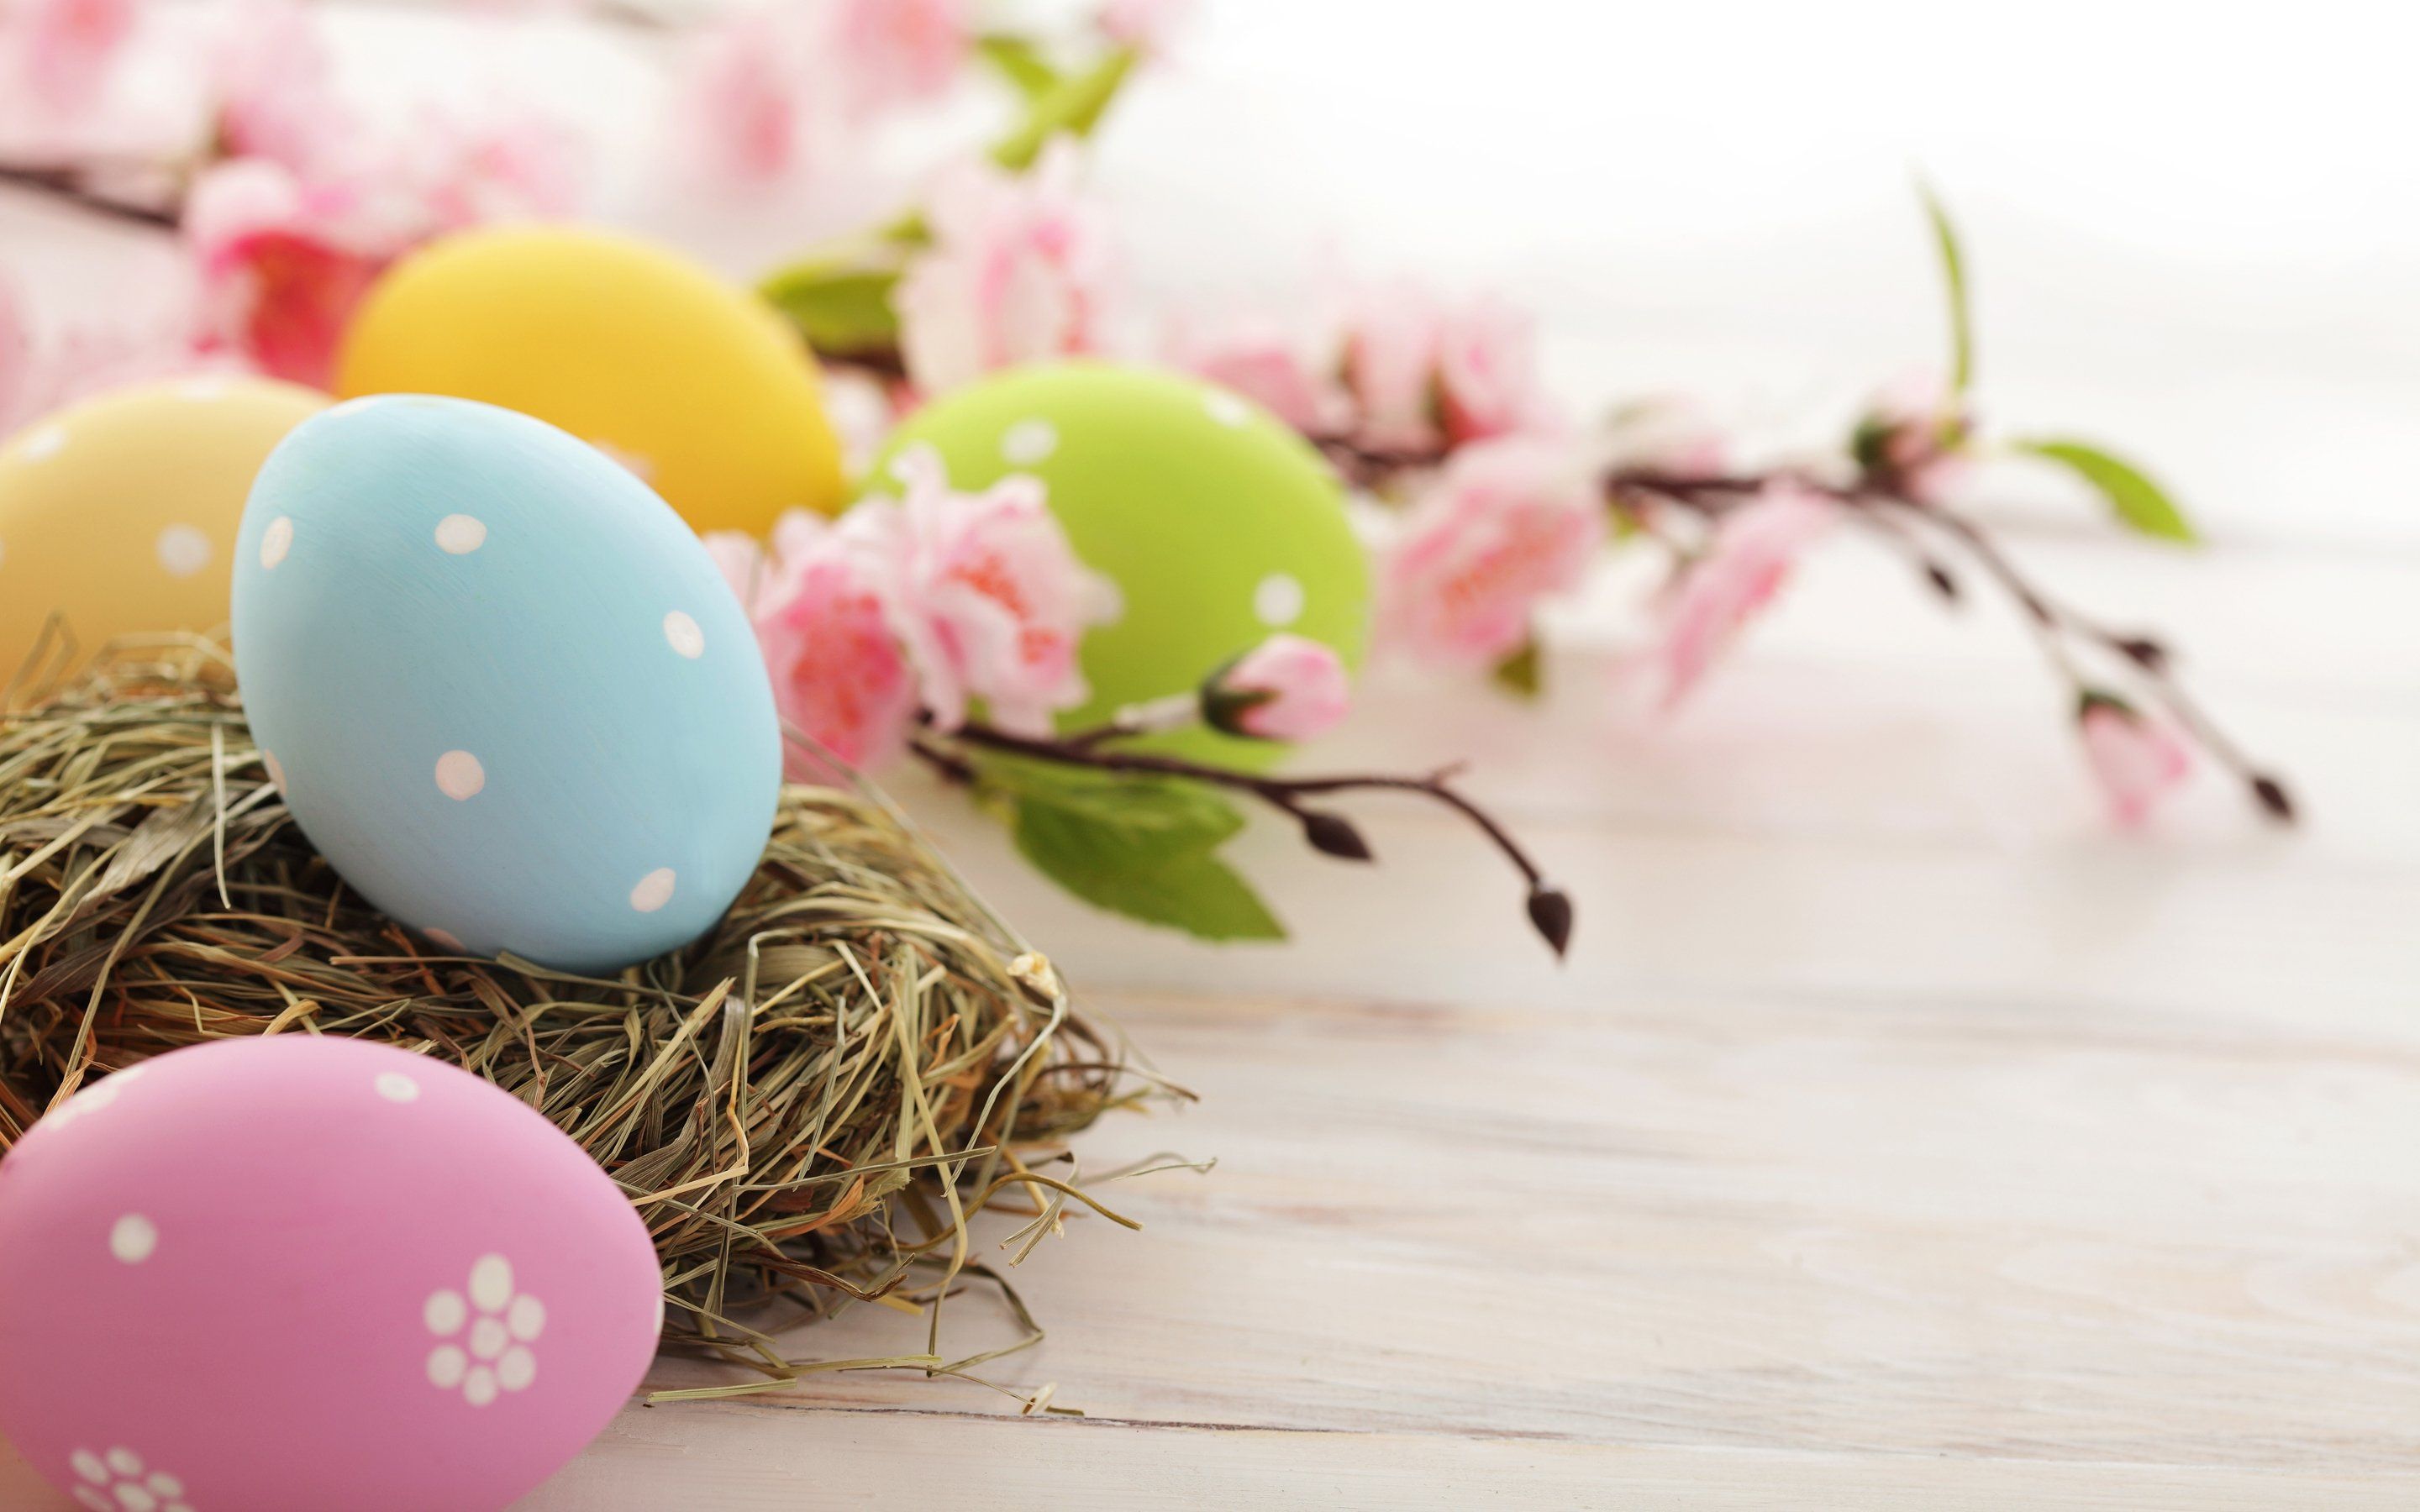 Free download Easter Wallpaper And Theme For Windows 10 All For Windows 10 [2880x1800] for your Desktop, Mobile & Tablet. Explore Free Easter Wallpaper for Windows 10